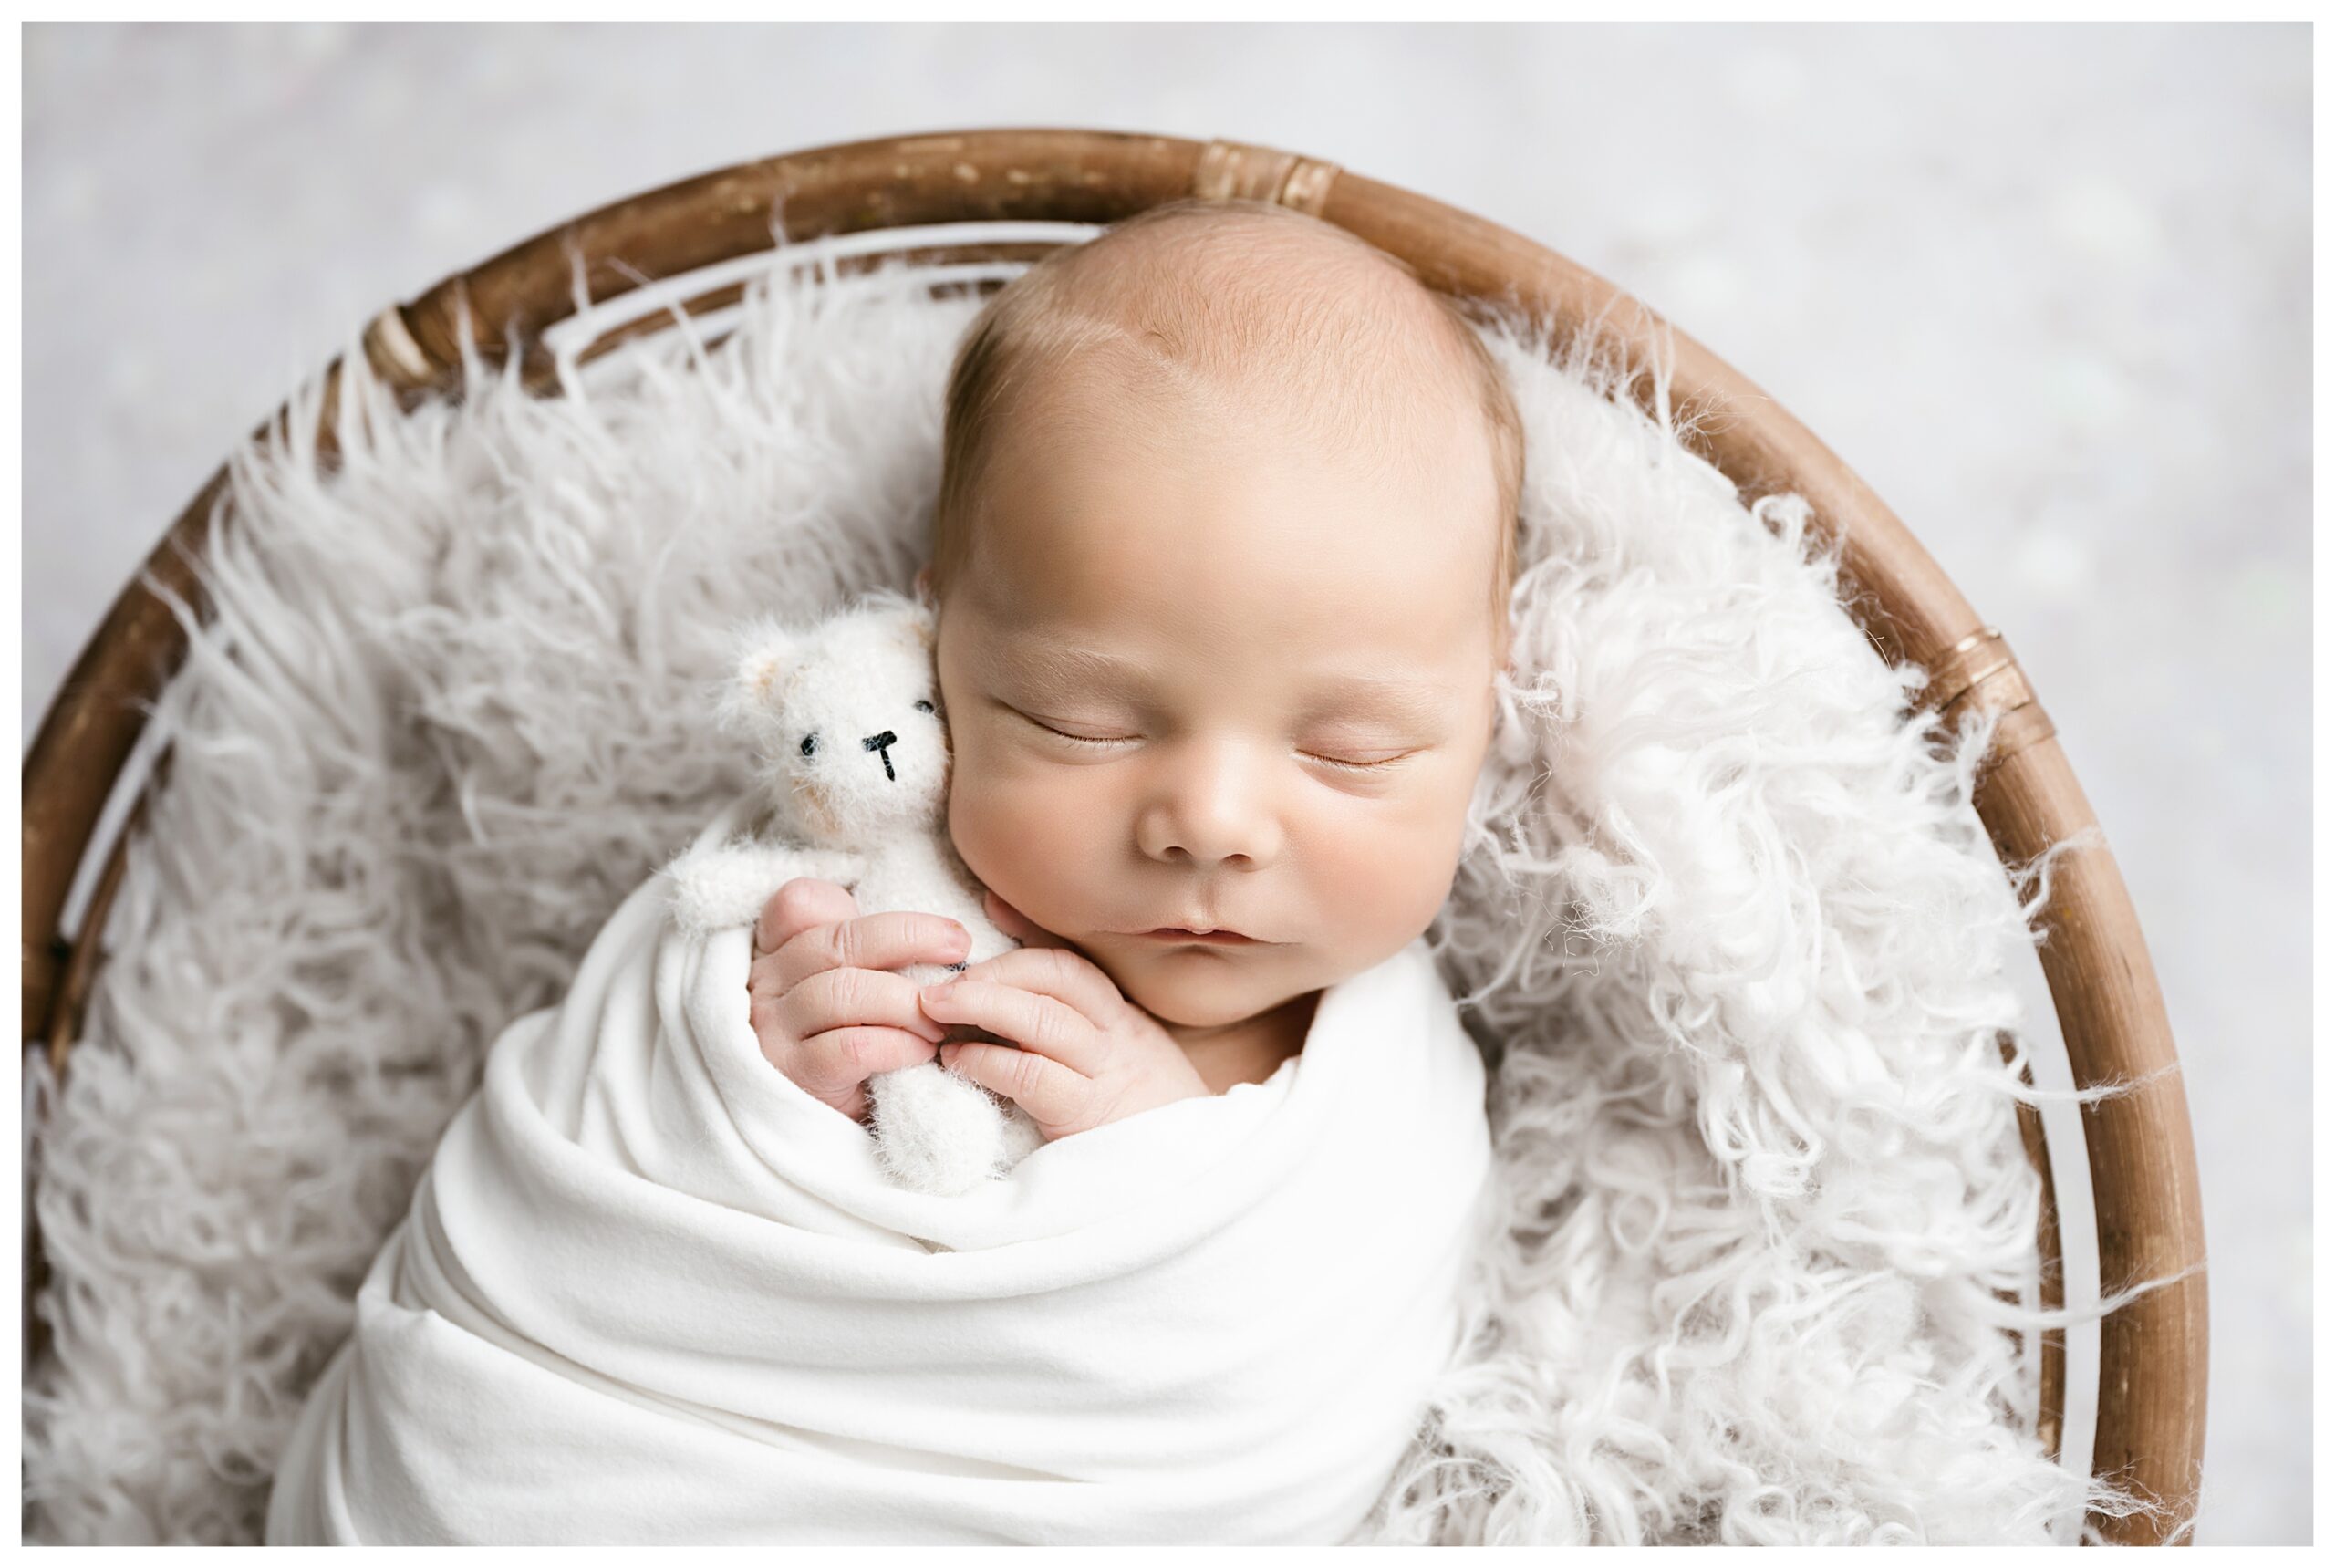 Baby is sleeping and swaddled holding a white teddy bear.